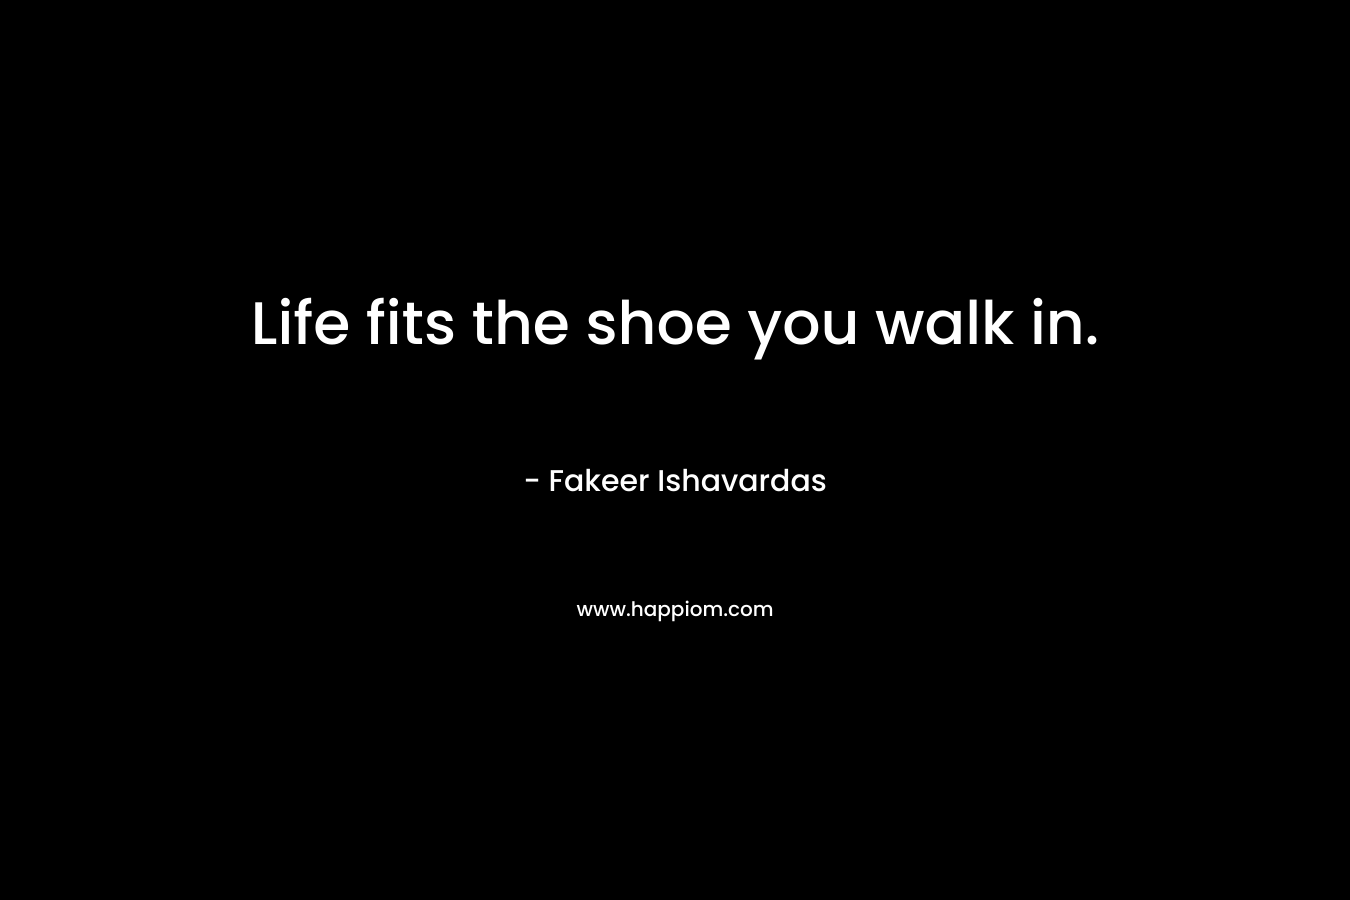 Life fits the shoe you walk in.